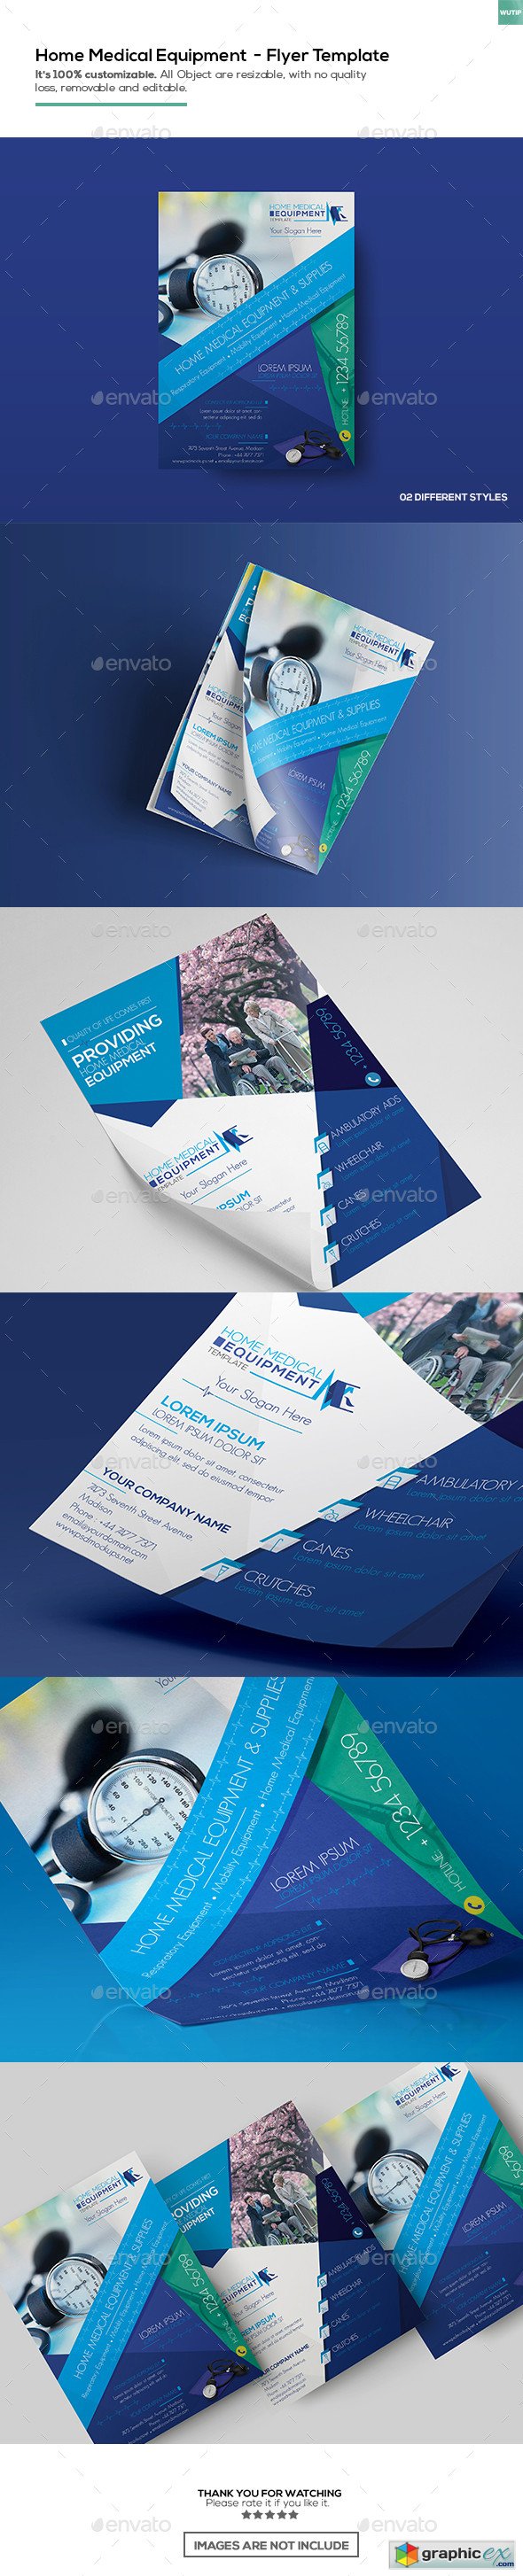 Home Medical Equipment/ Flyer Template